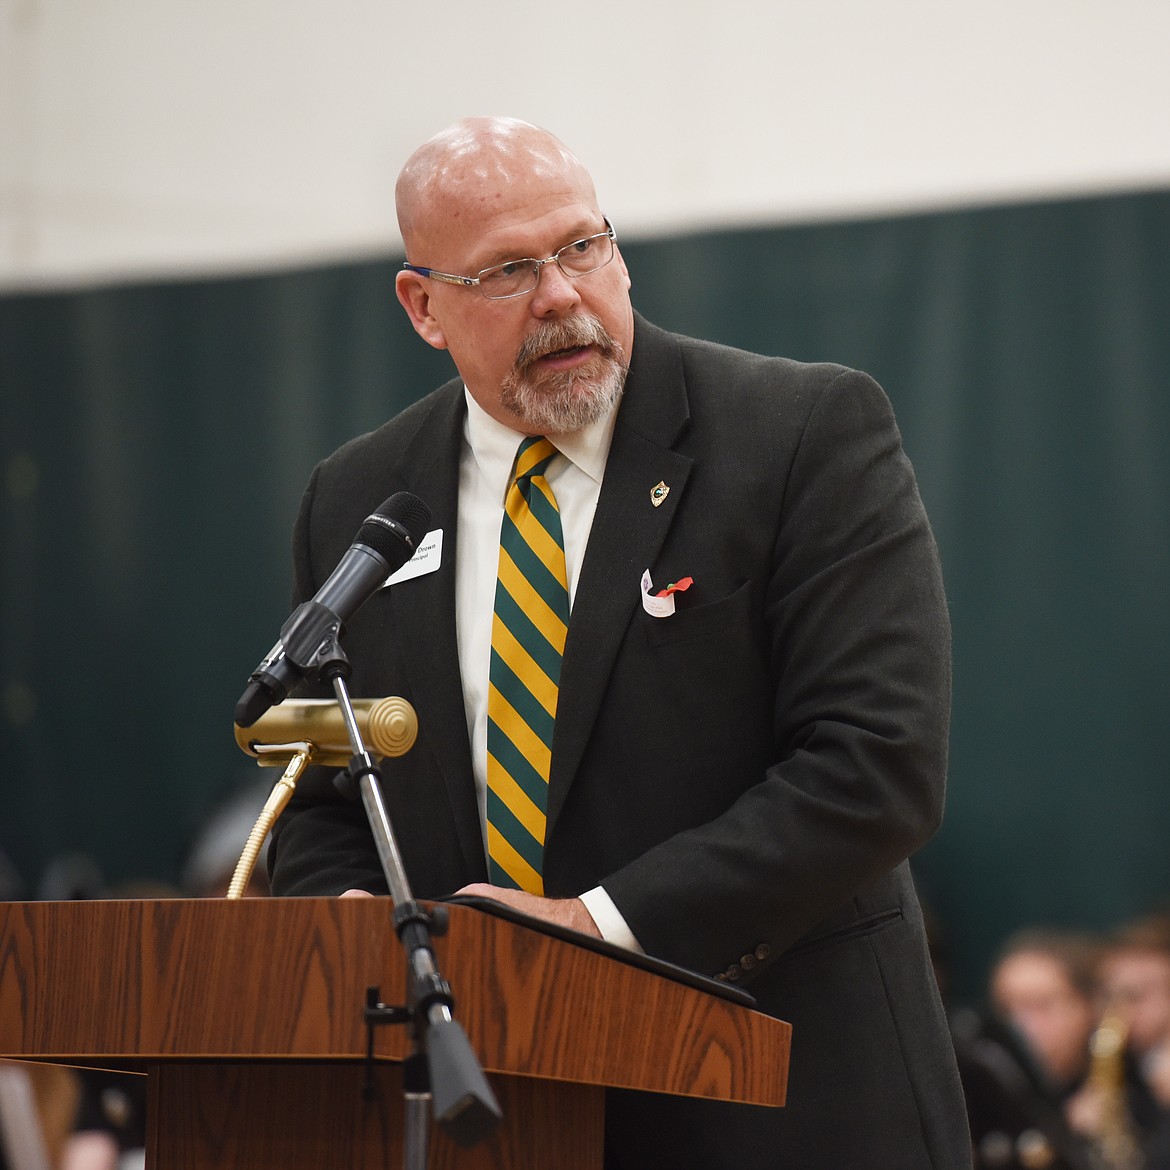 Principal Kerry Drown making opening remarks during the Veterans Day Community Event at Whitefish High School on Friday, November 10. Drown reminded students that Veterans Day is an opportunity to reflect, to recognize and to how respect and appreciation for all those who served.(Brenda Ahearn/Daily Inter Lake)